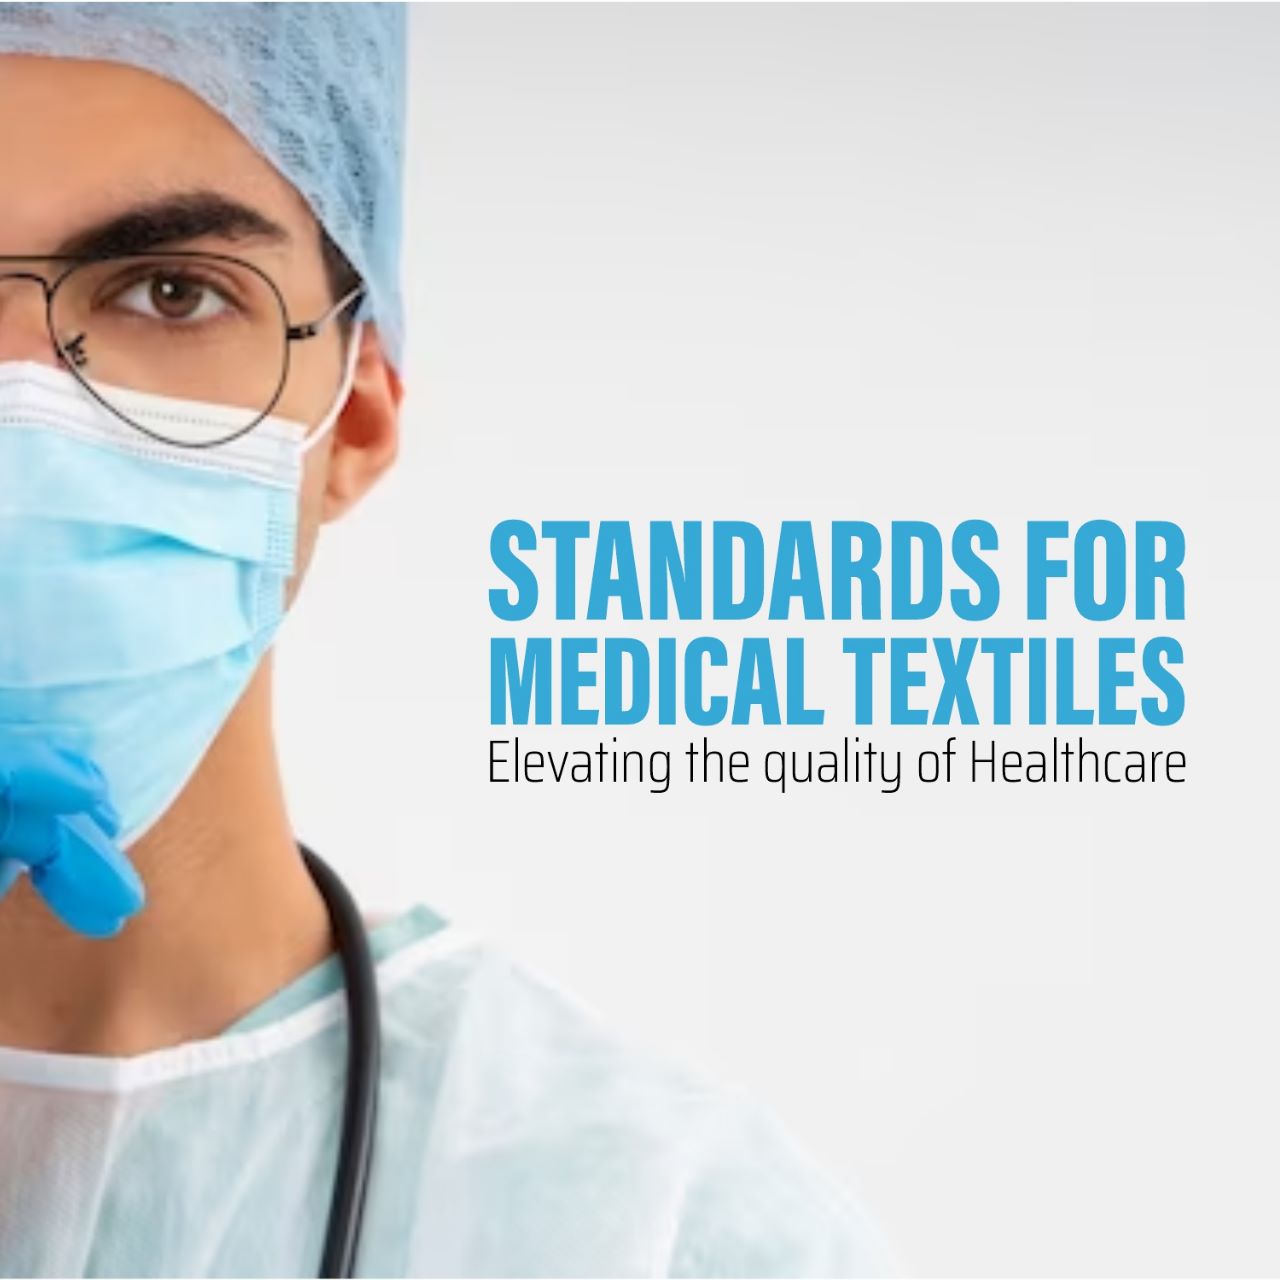 Isolation Gown - AAMI Level 1, PPE Level 2 | Medical Protective Clothing